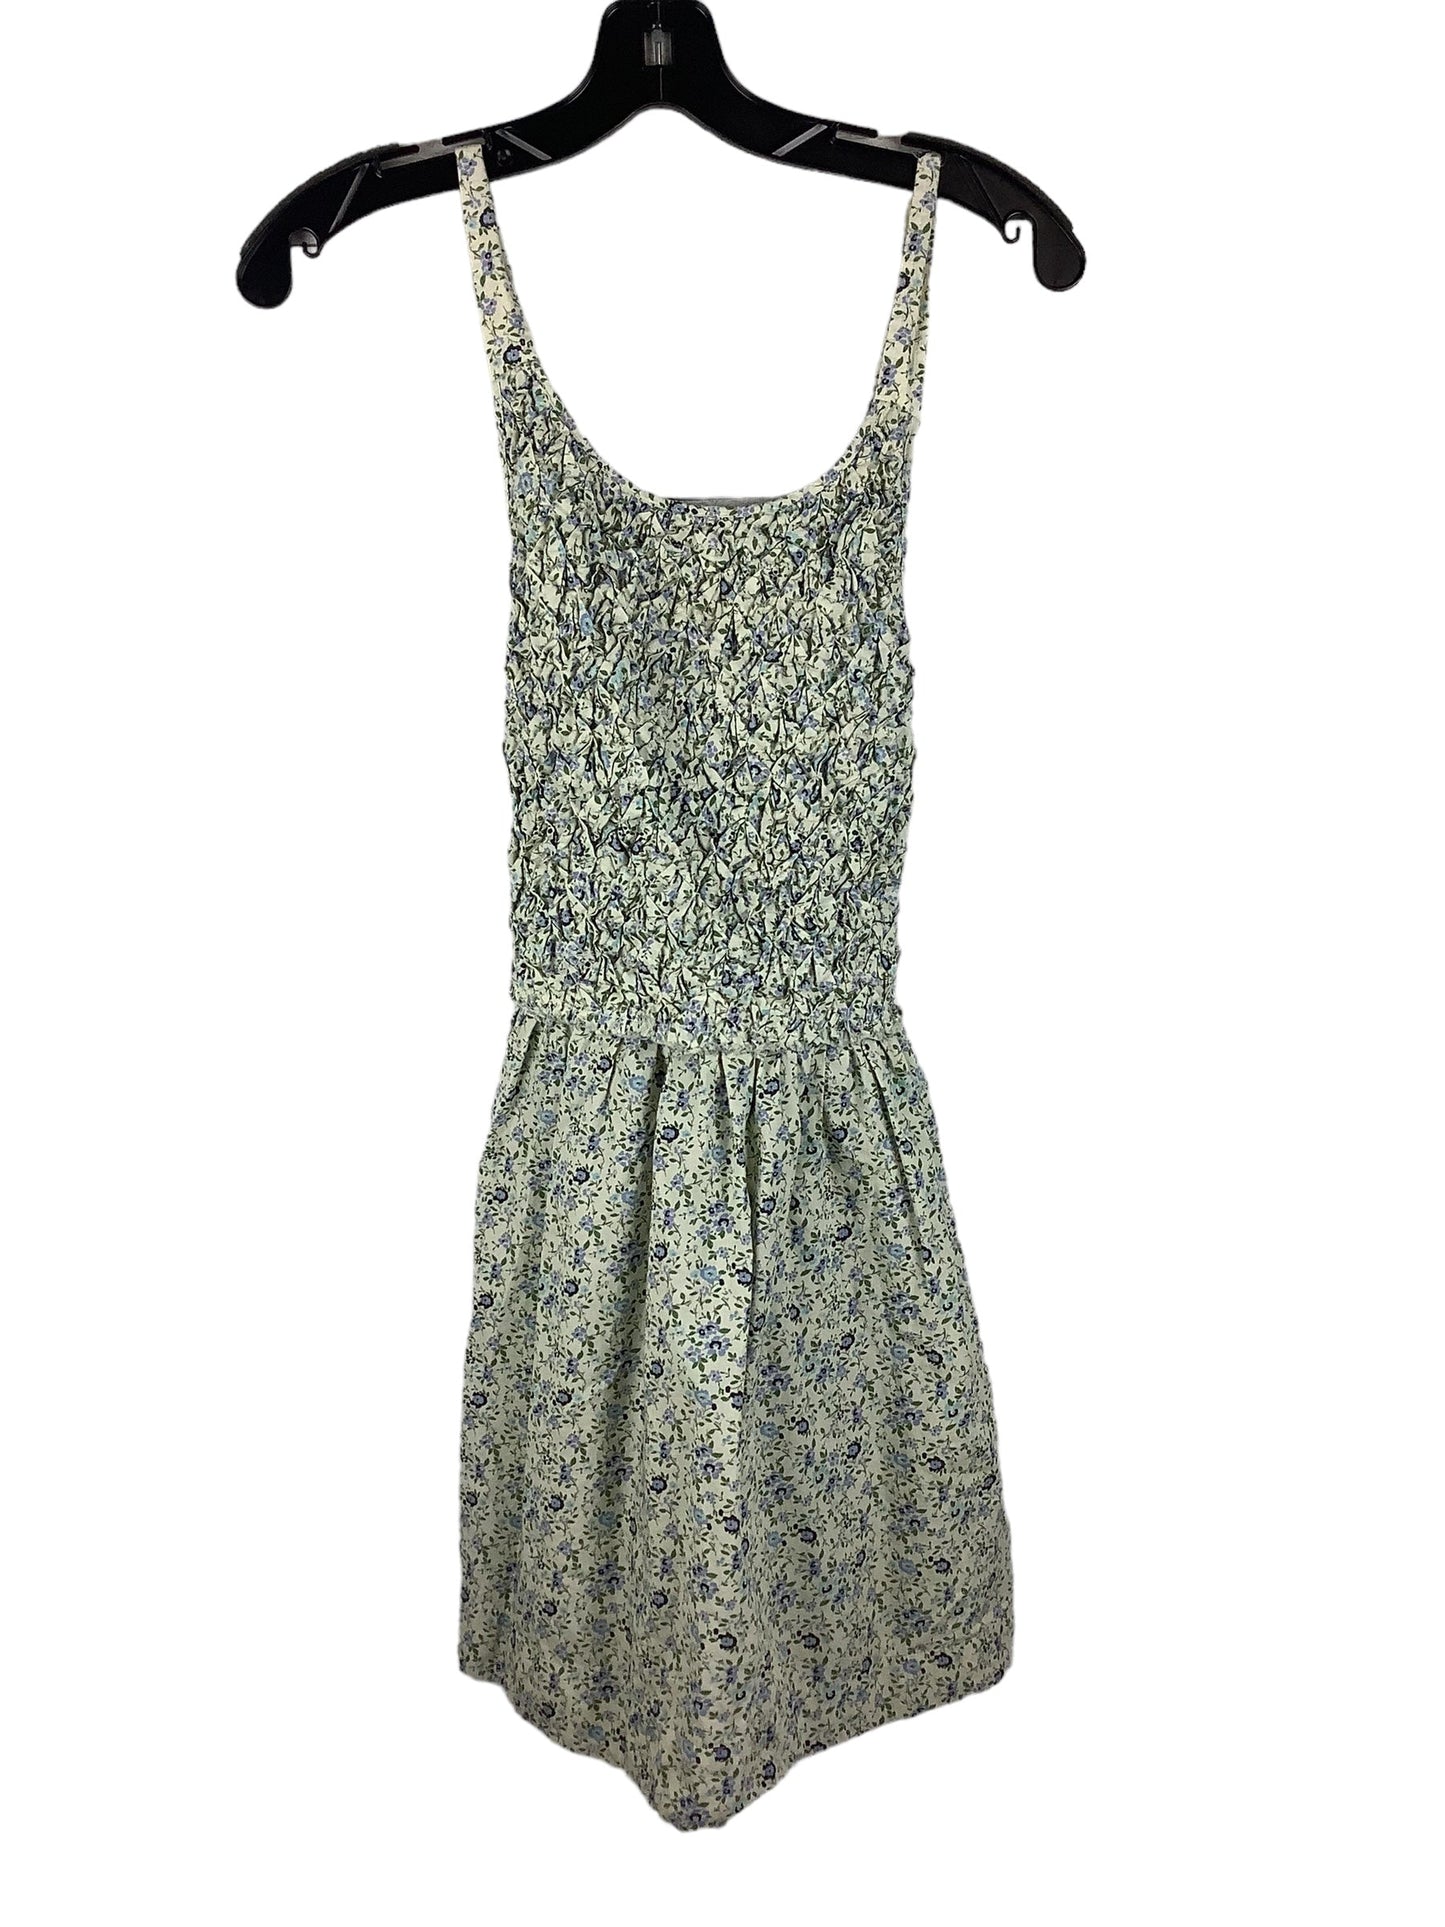 Floral Print Dress Casual Short Free People, Size Xs